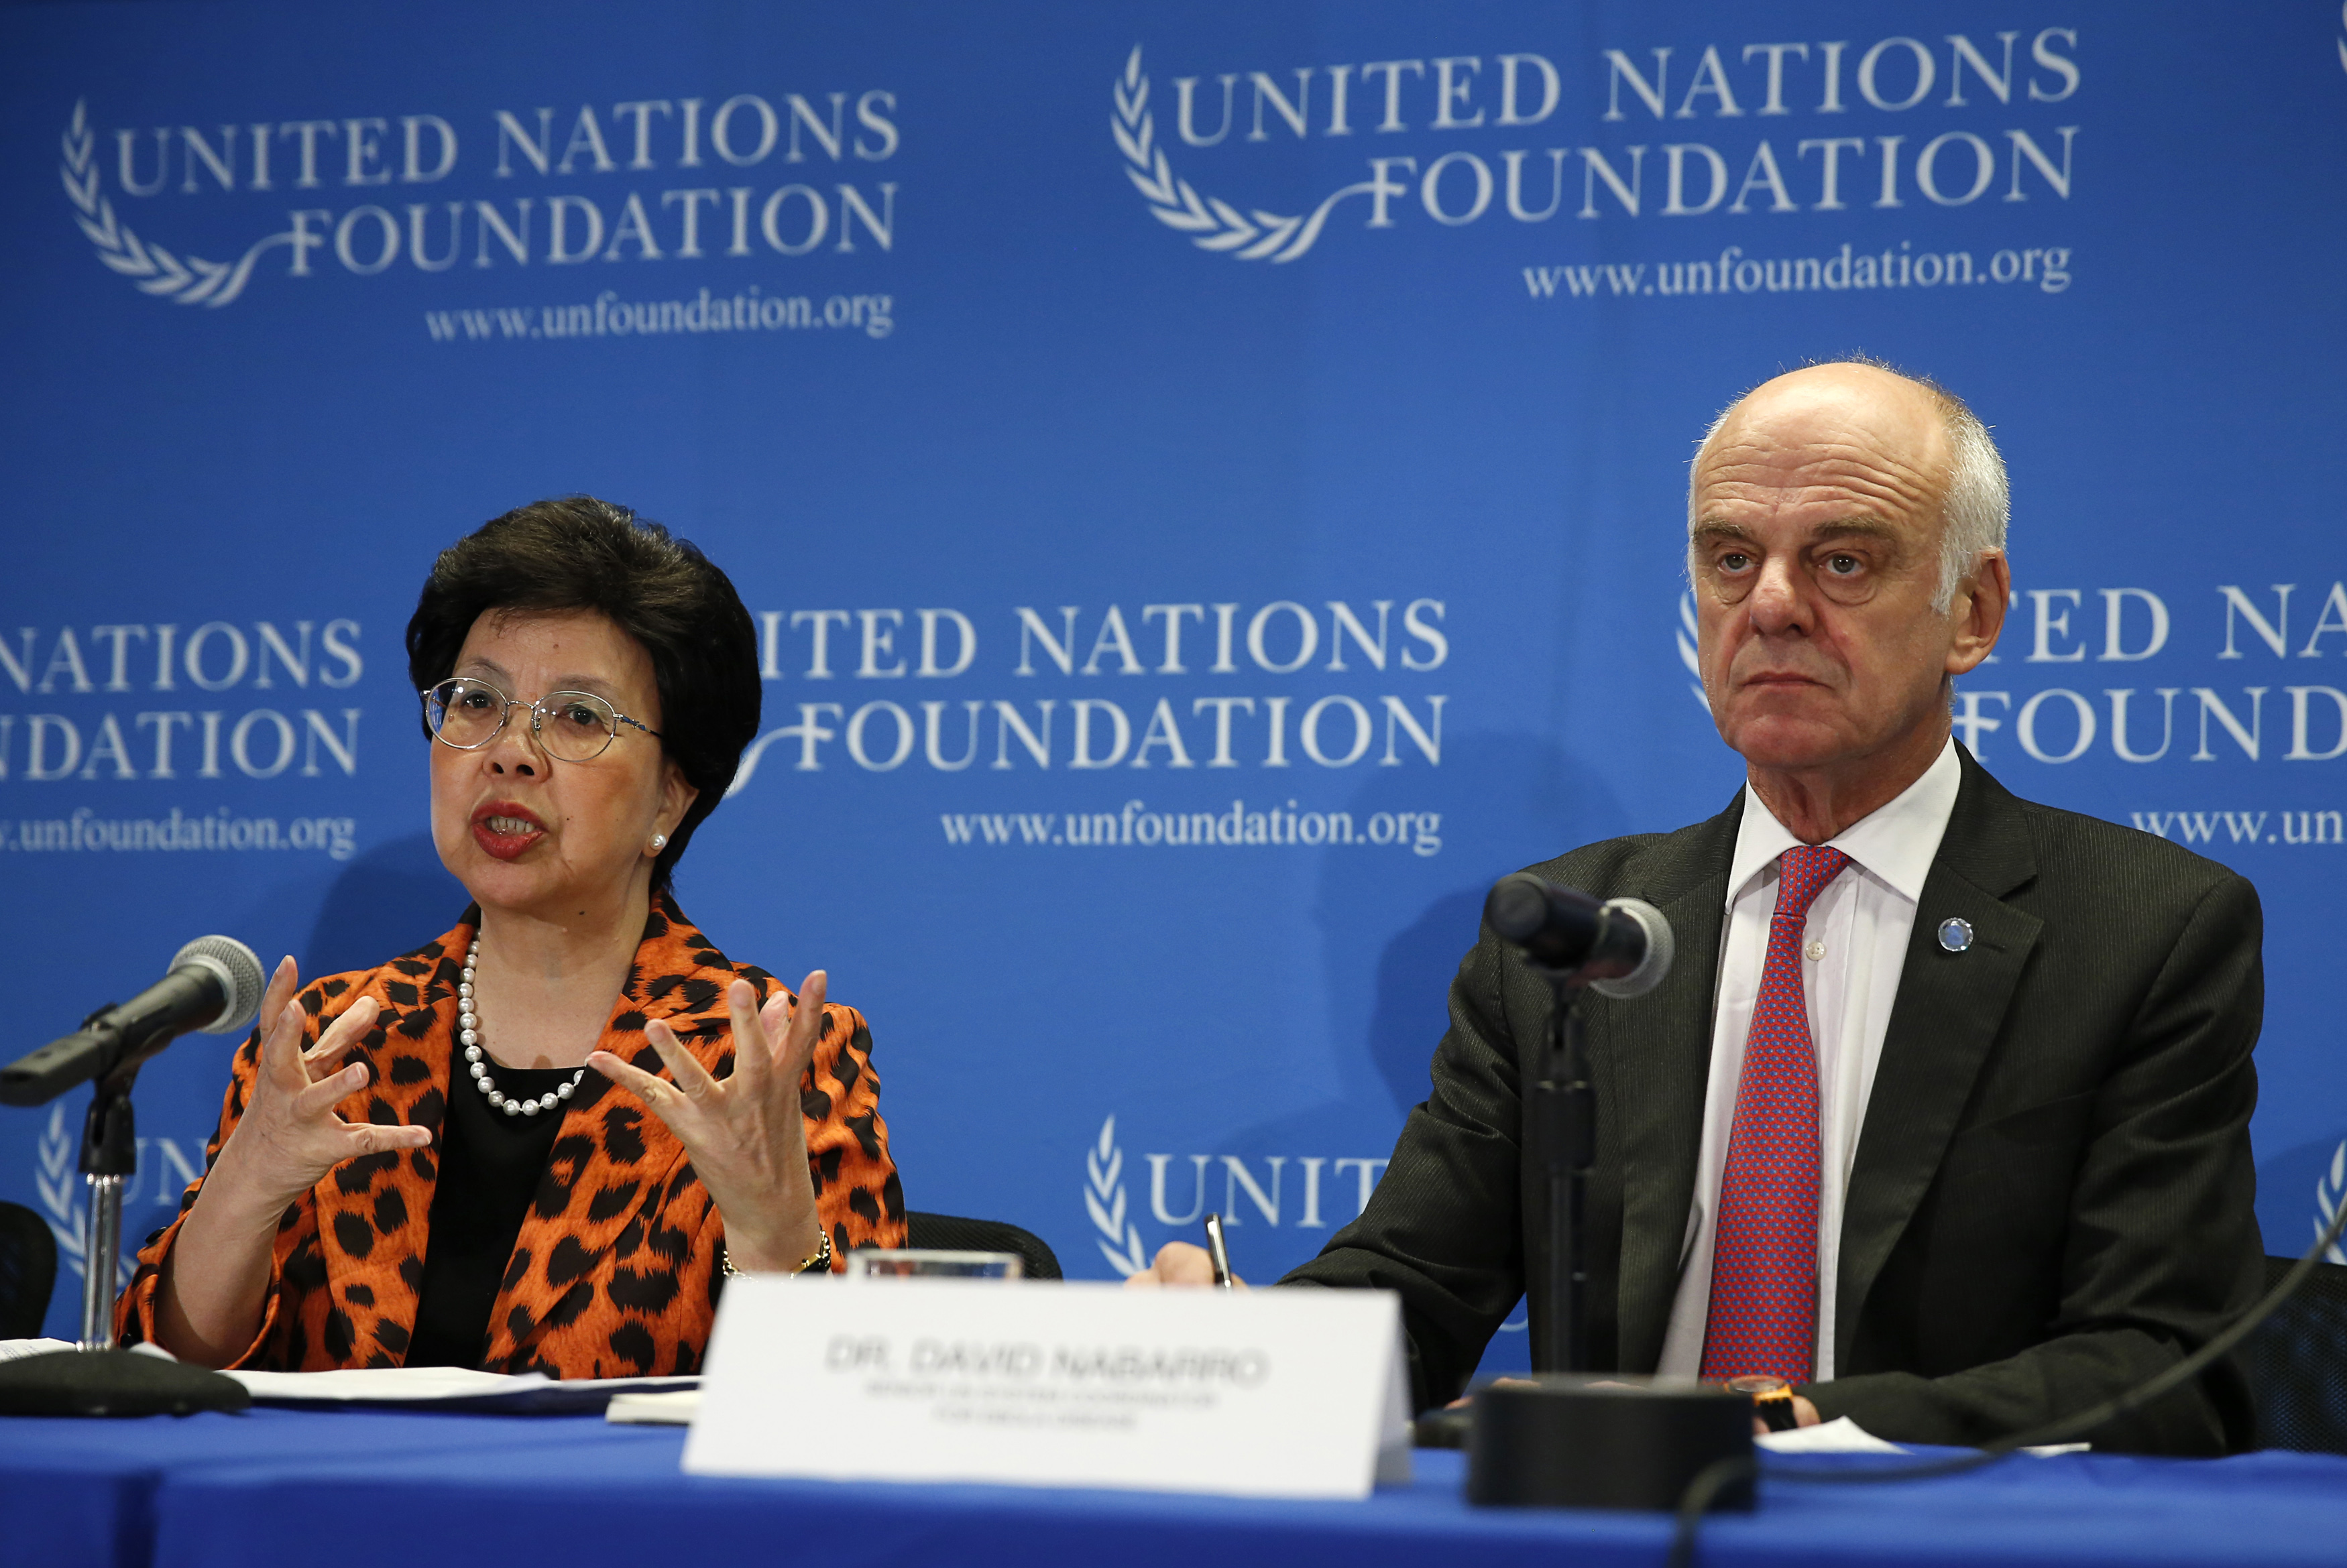 World Health Organization (WHO) Director-General Dr. Margaret Chan (L) and Senior United Nations System Coordinator for Ebola Virus Disease Dr. David Nabarro appear at a briefing to discuss the Ebola outbreak in West Africa at the UN Foundation in Washington on September 3, 2014. (Gary Cameron—Reuters)